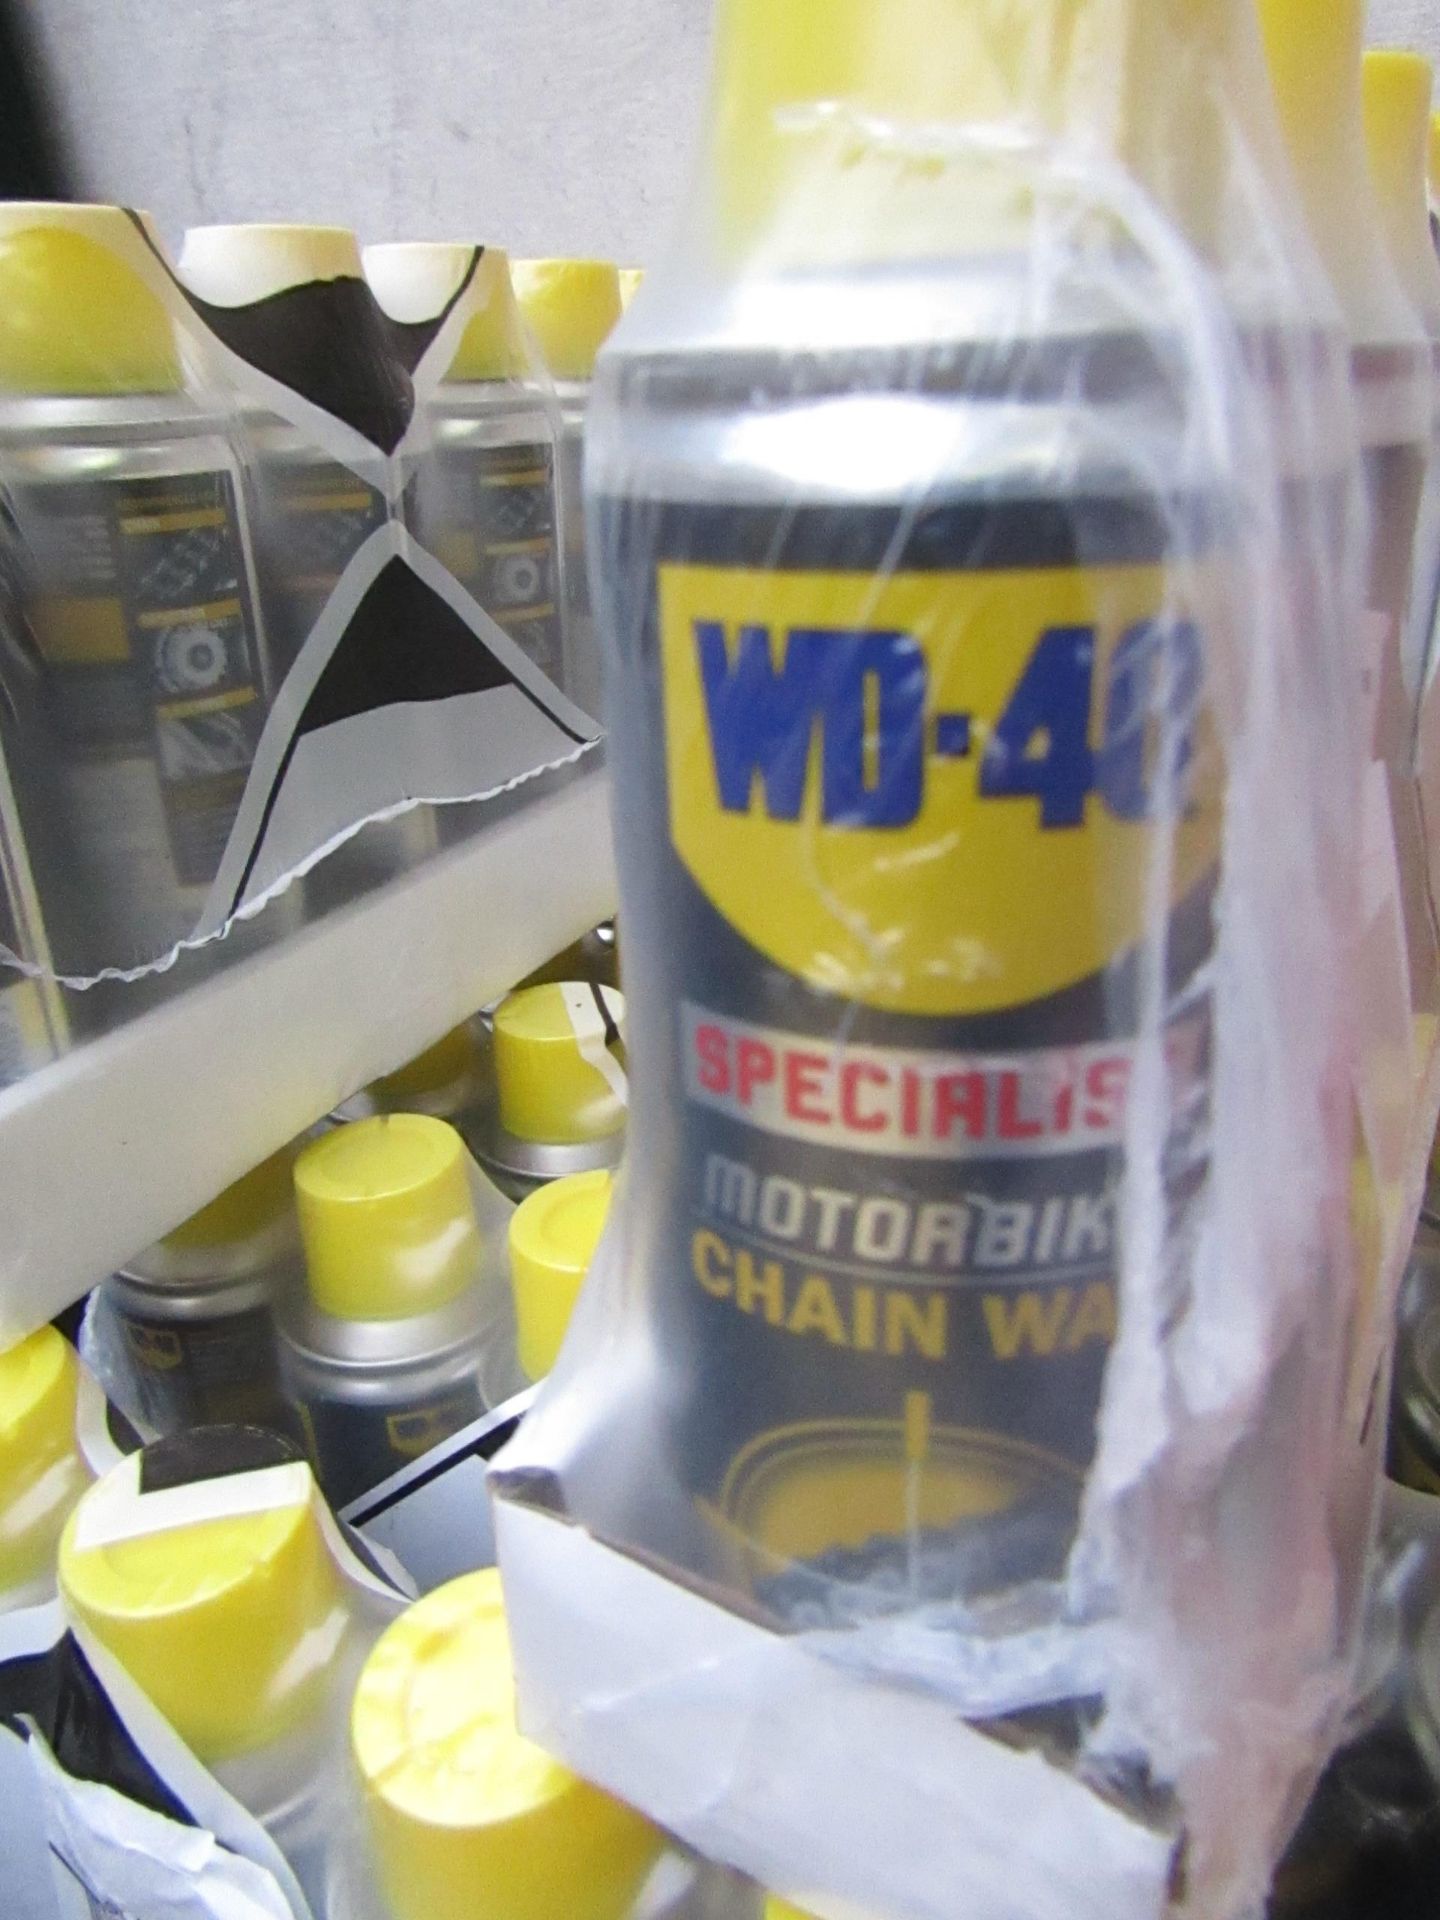 6x 200ml Cabnisters of WD40 Motorbike chain Lube, new